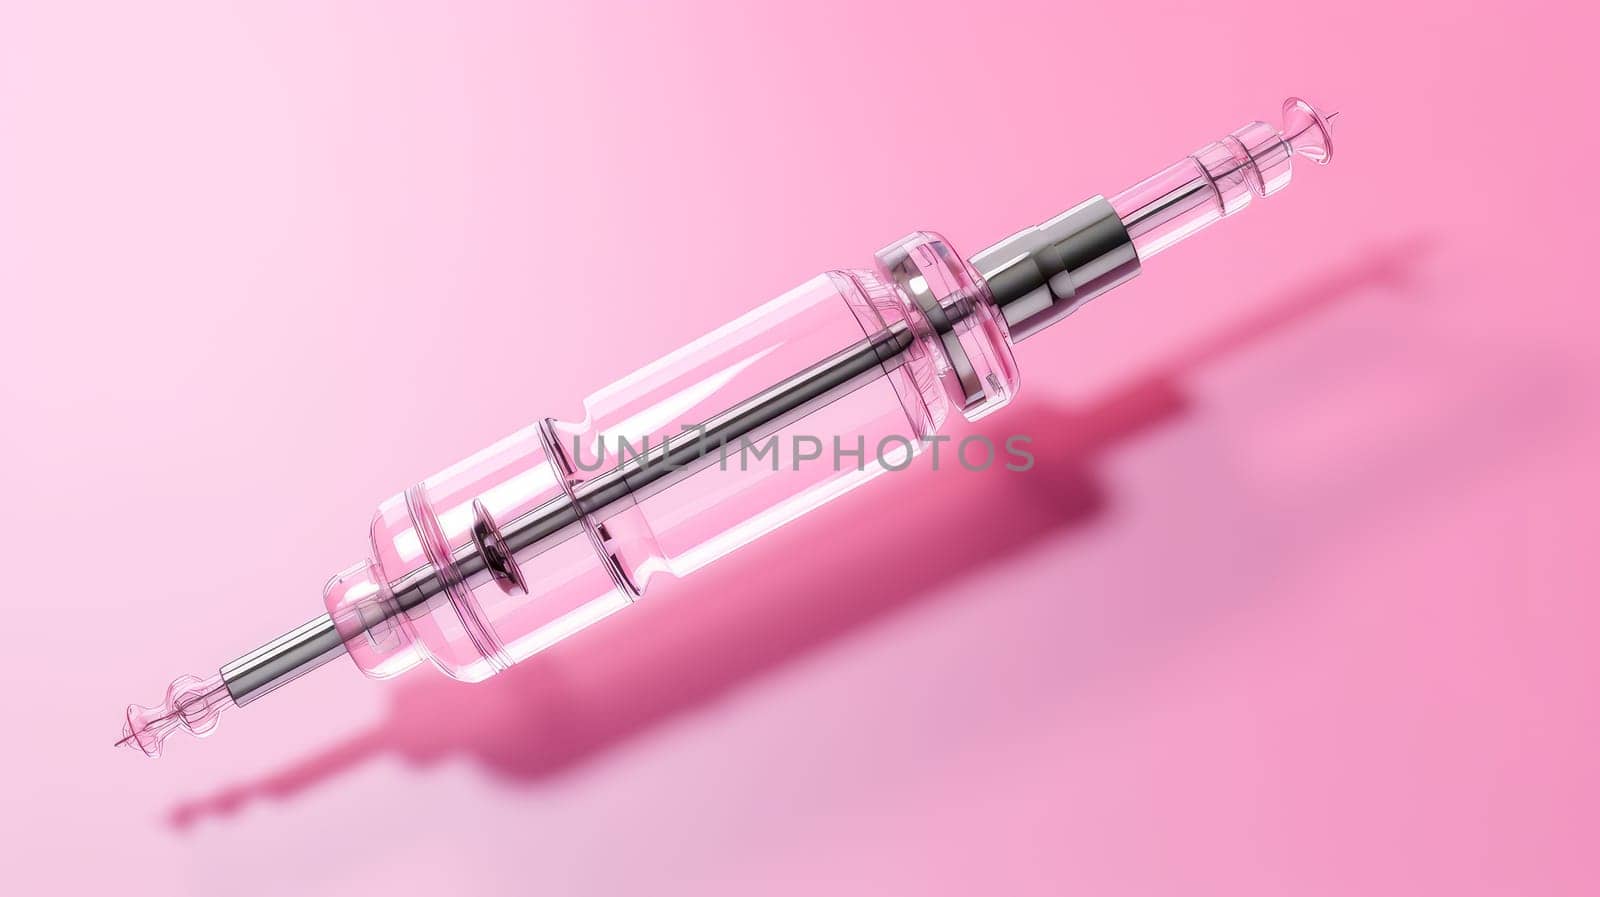 A syringe with a vaccine against diseases on a pink background. by Alla_Yurtayeva